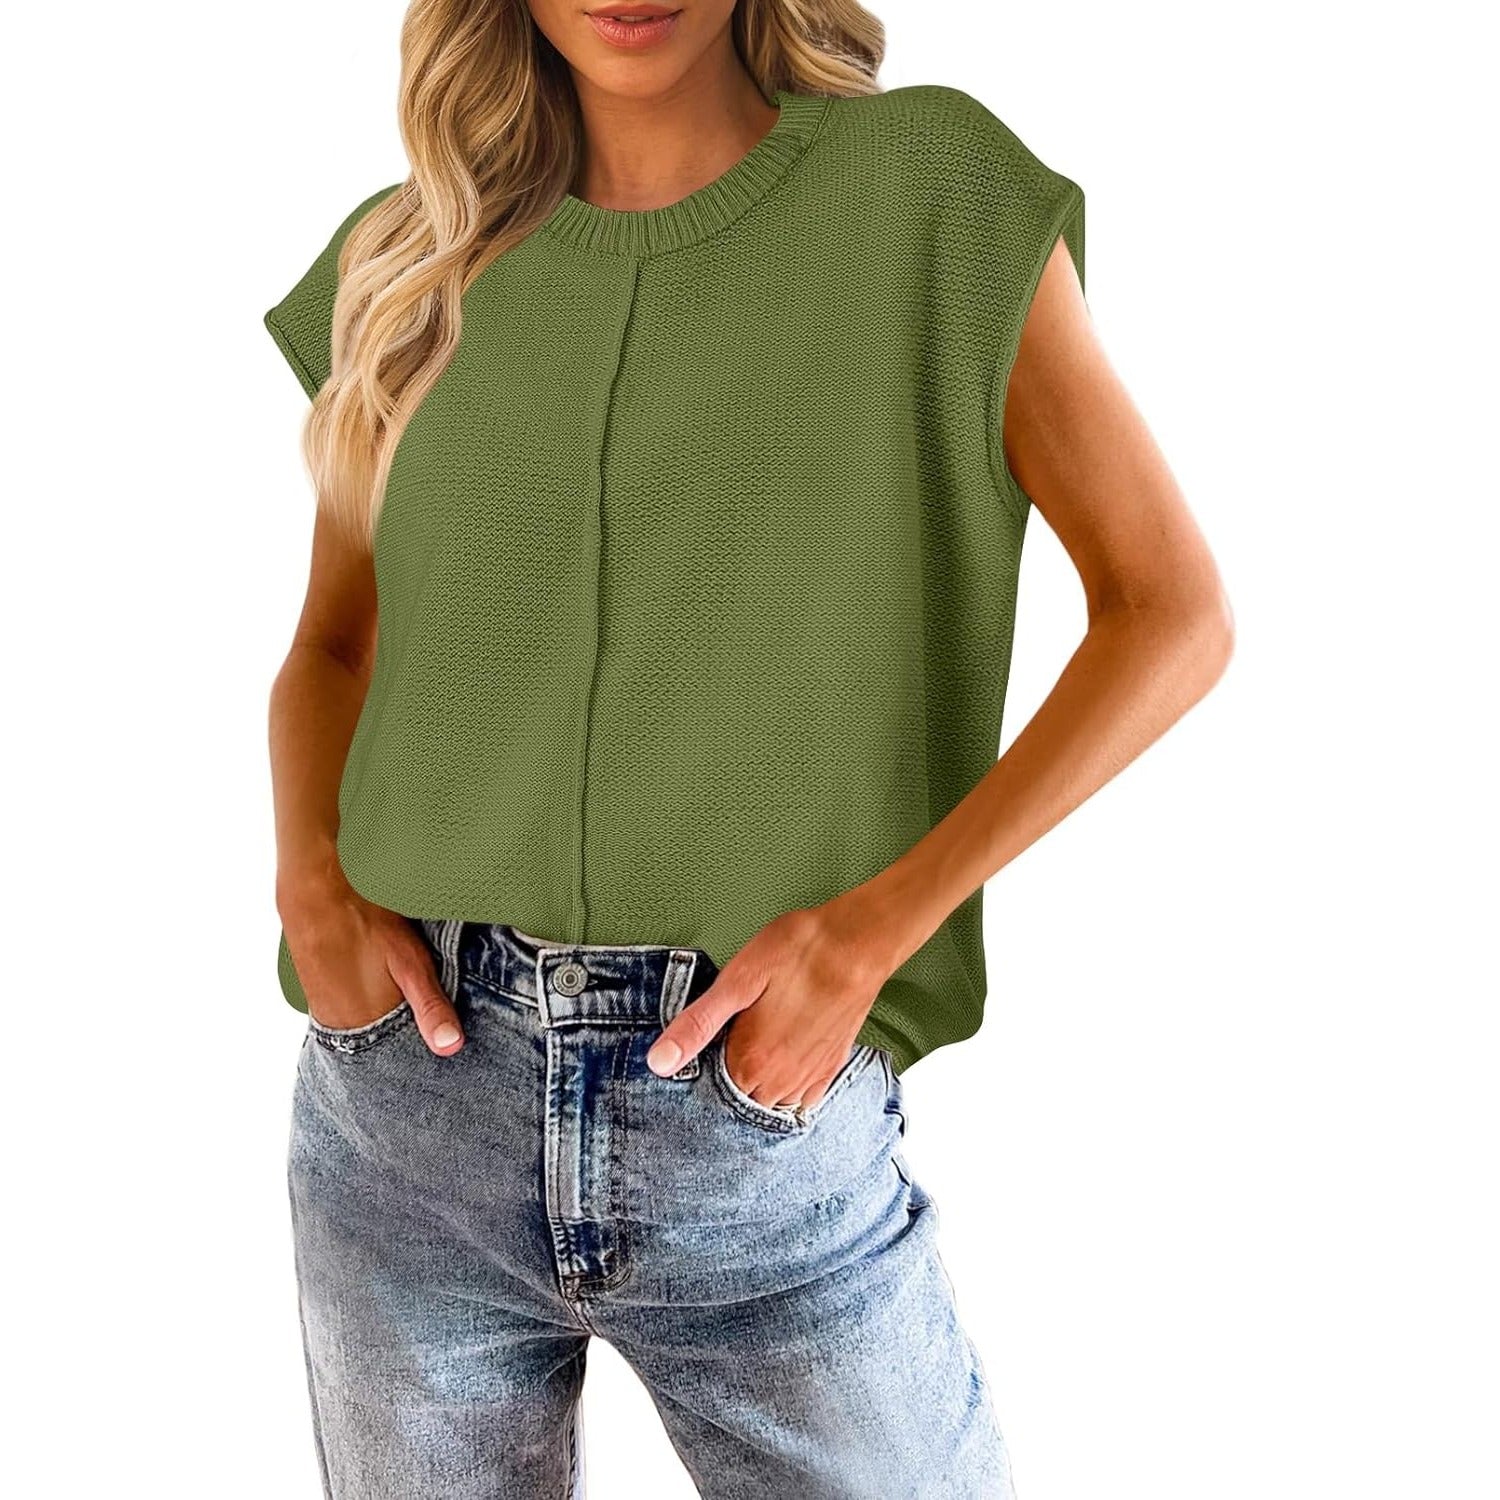 Women's Summer Cap Sleeve Crewneck Tops Casual Loose Fit Knit Sweater Pullover Tank Top